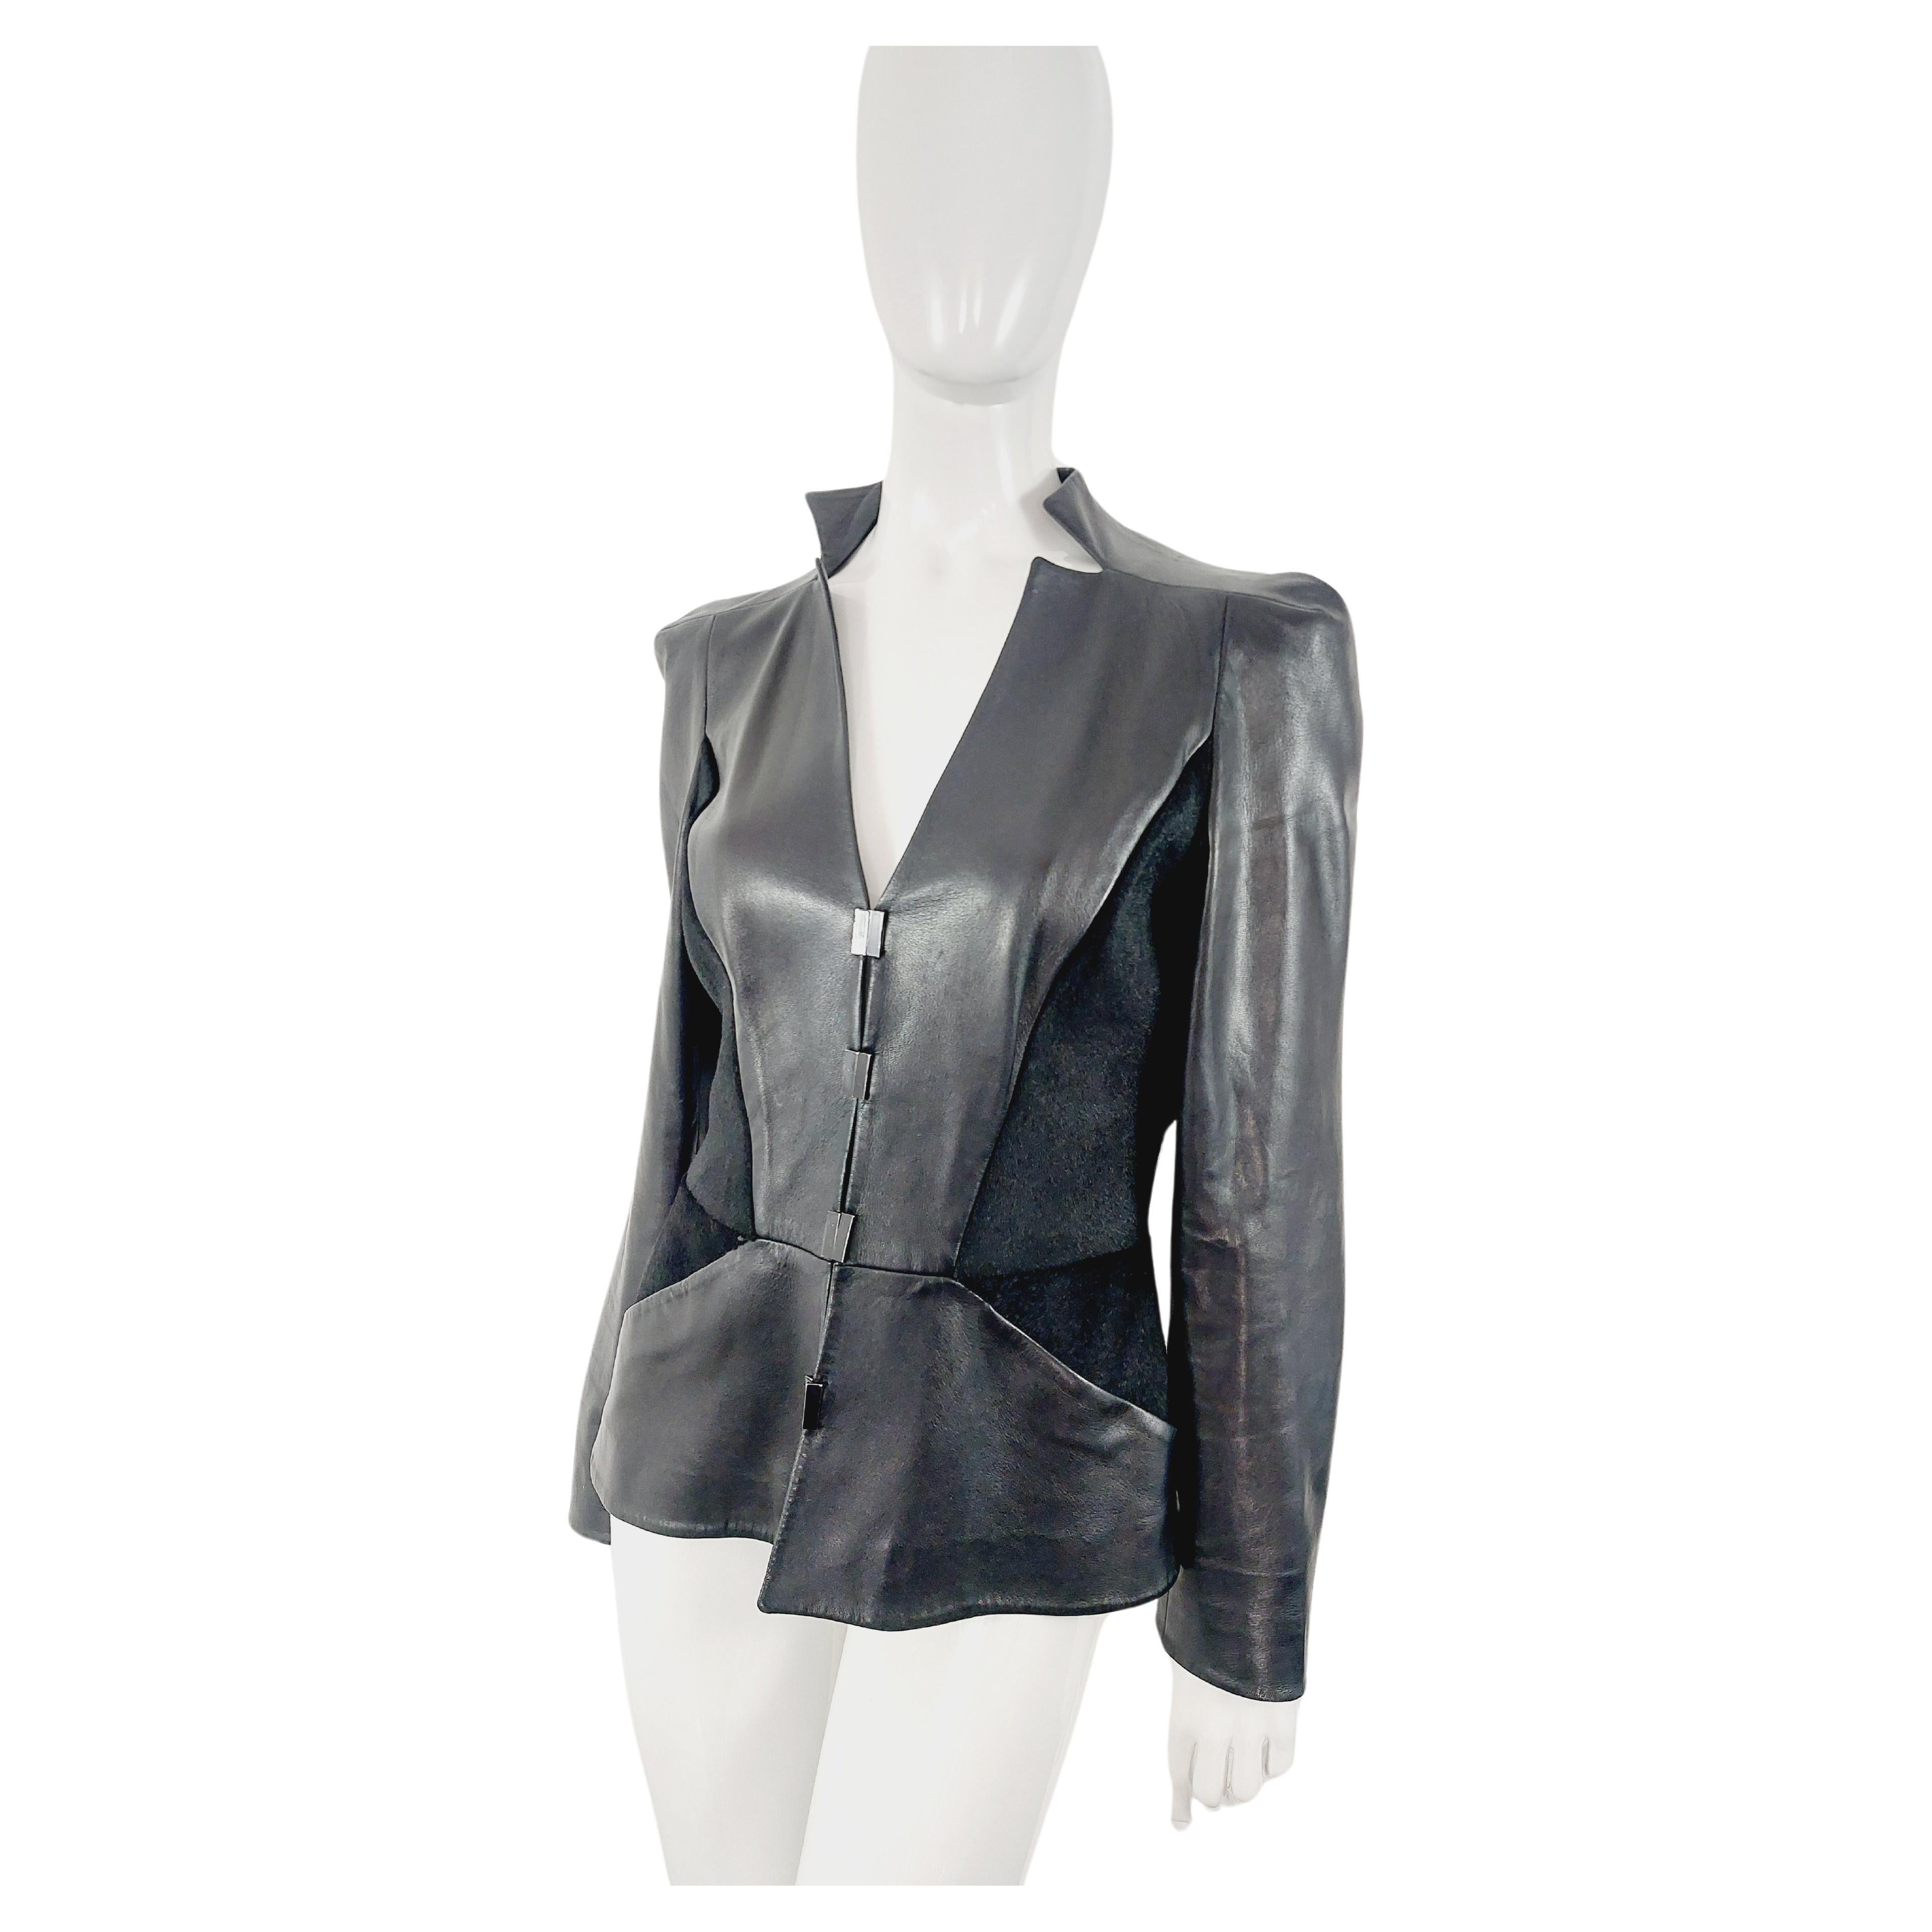 Thierry Mugler Couture Leather Lambskin Runway Motorcycle Wasp Waist Jacket